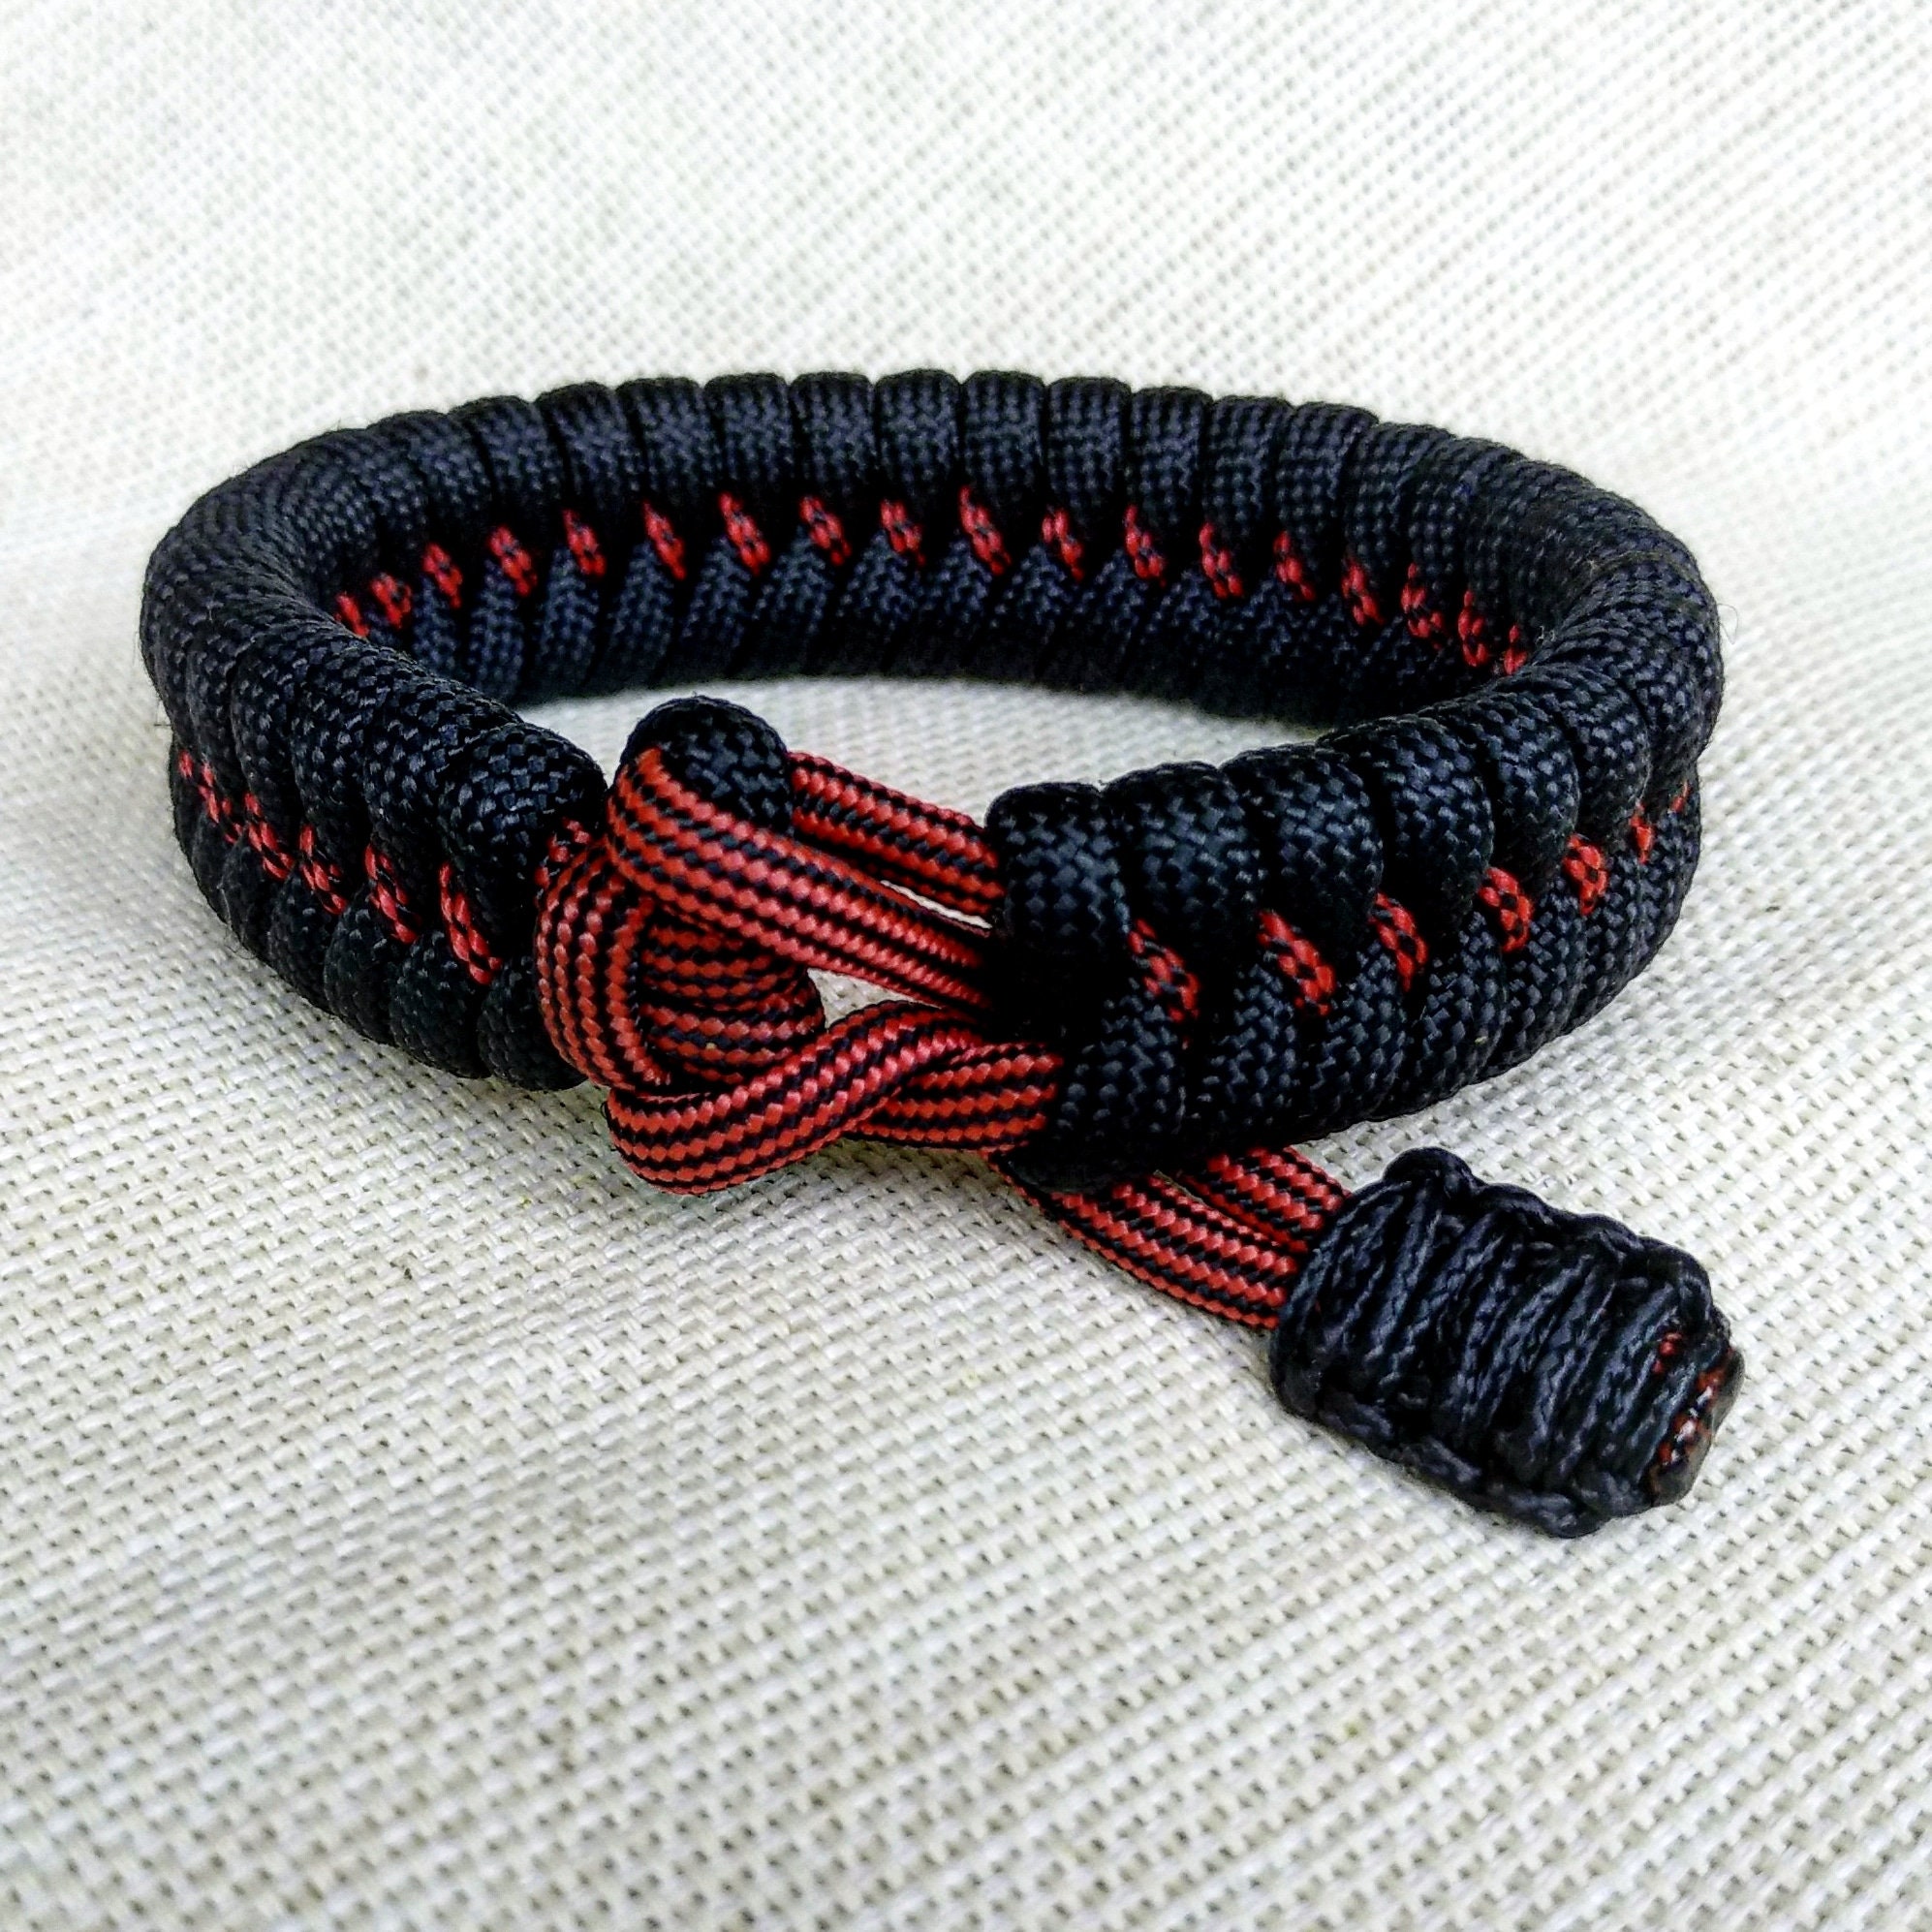 Paracord Bracelet Made of Mad Max Paracord, Army Style, a Great